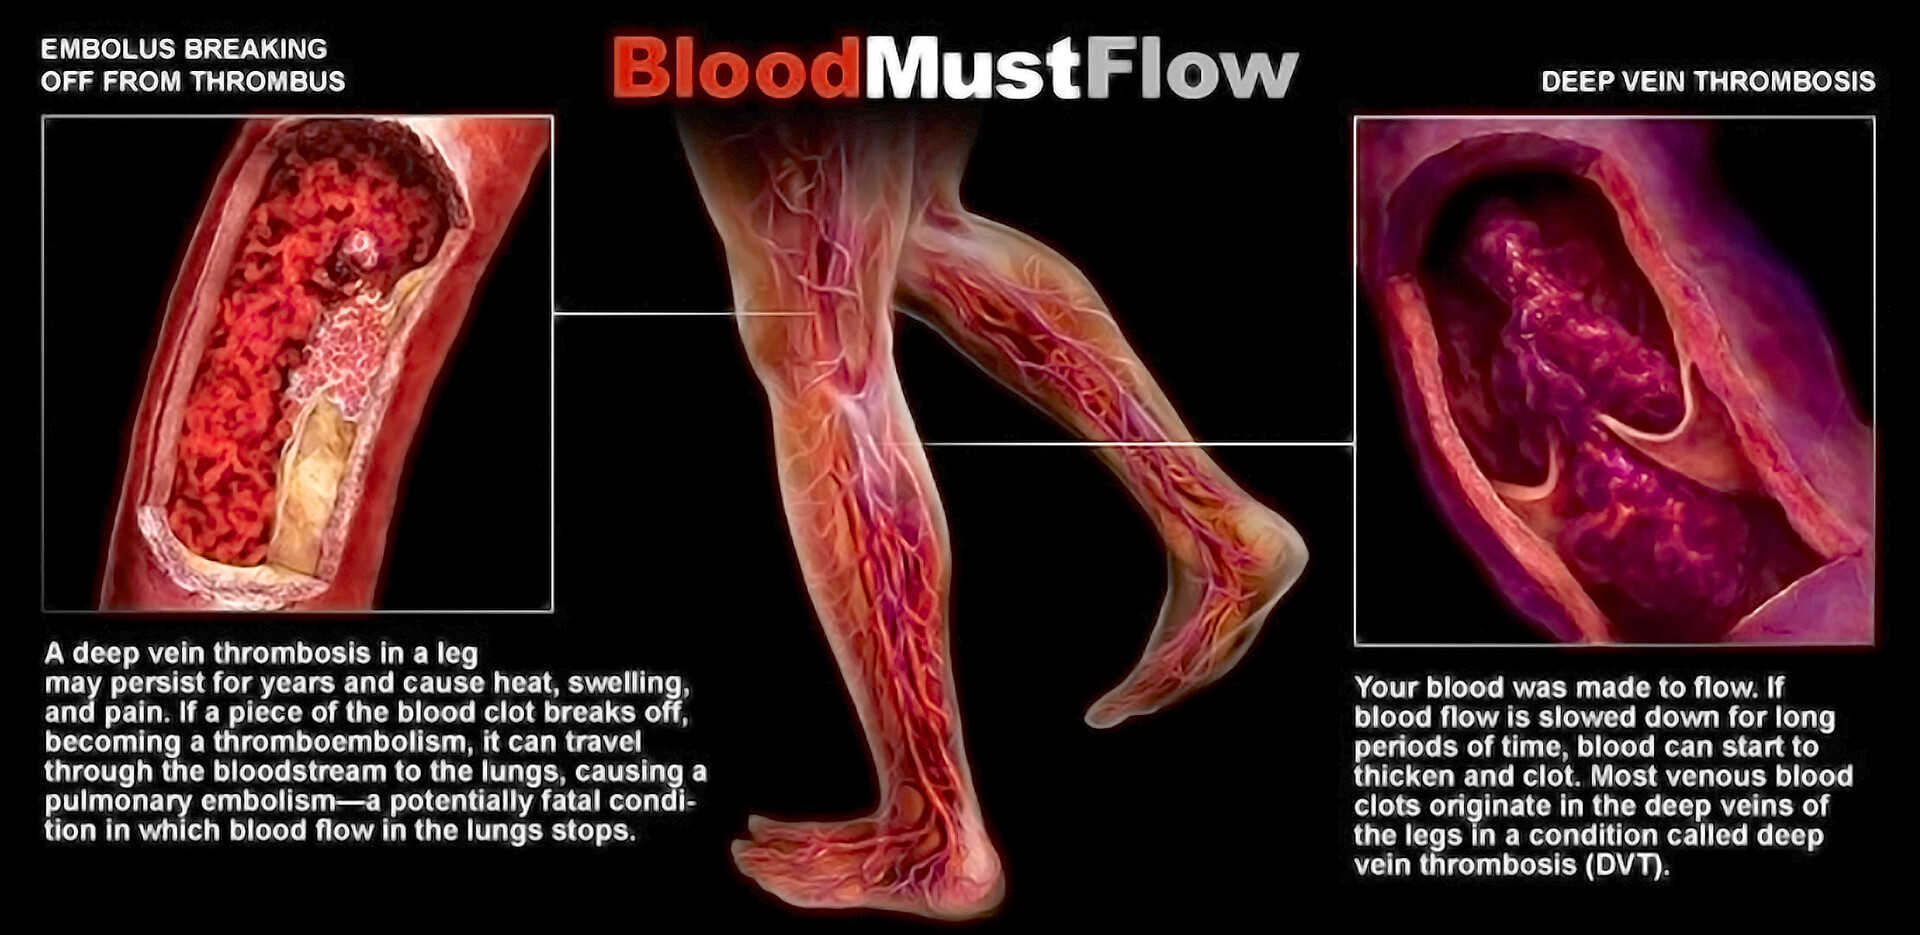 How to Spot and Prevent Deep Vein Thrombosis